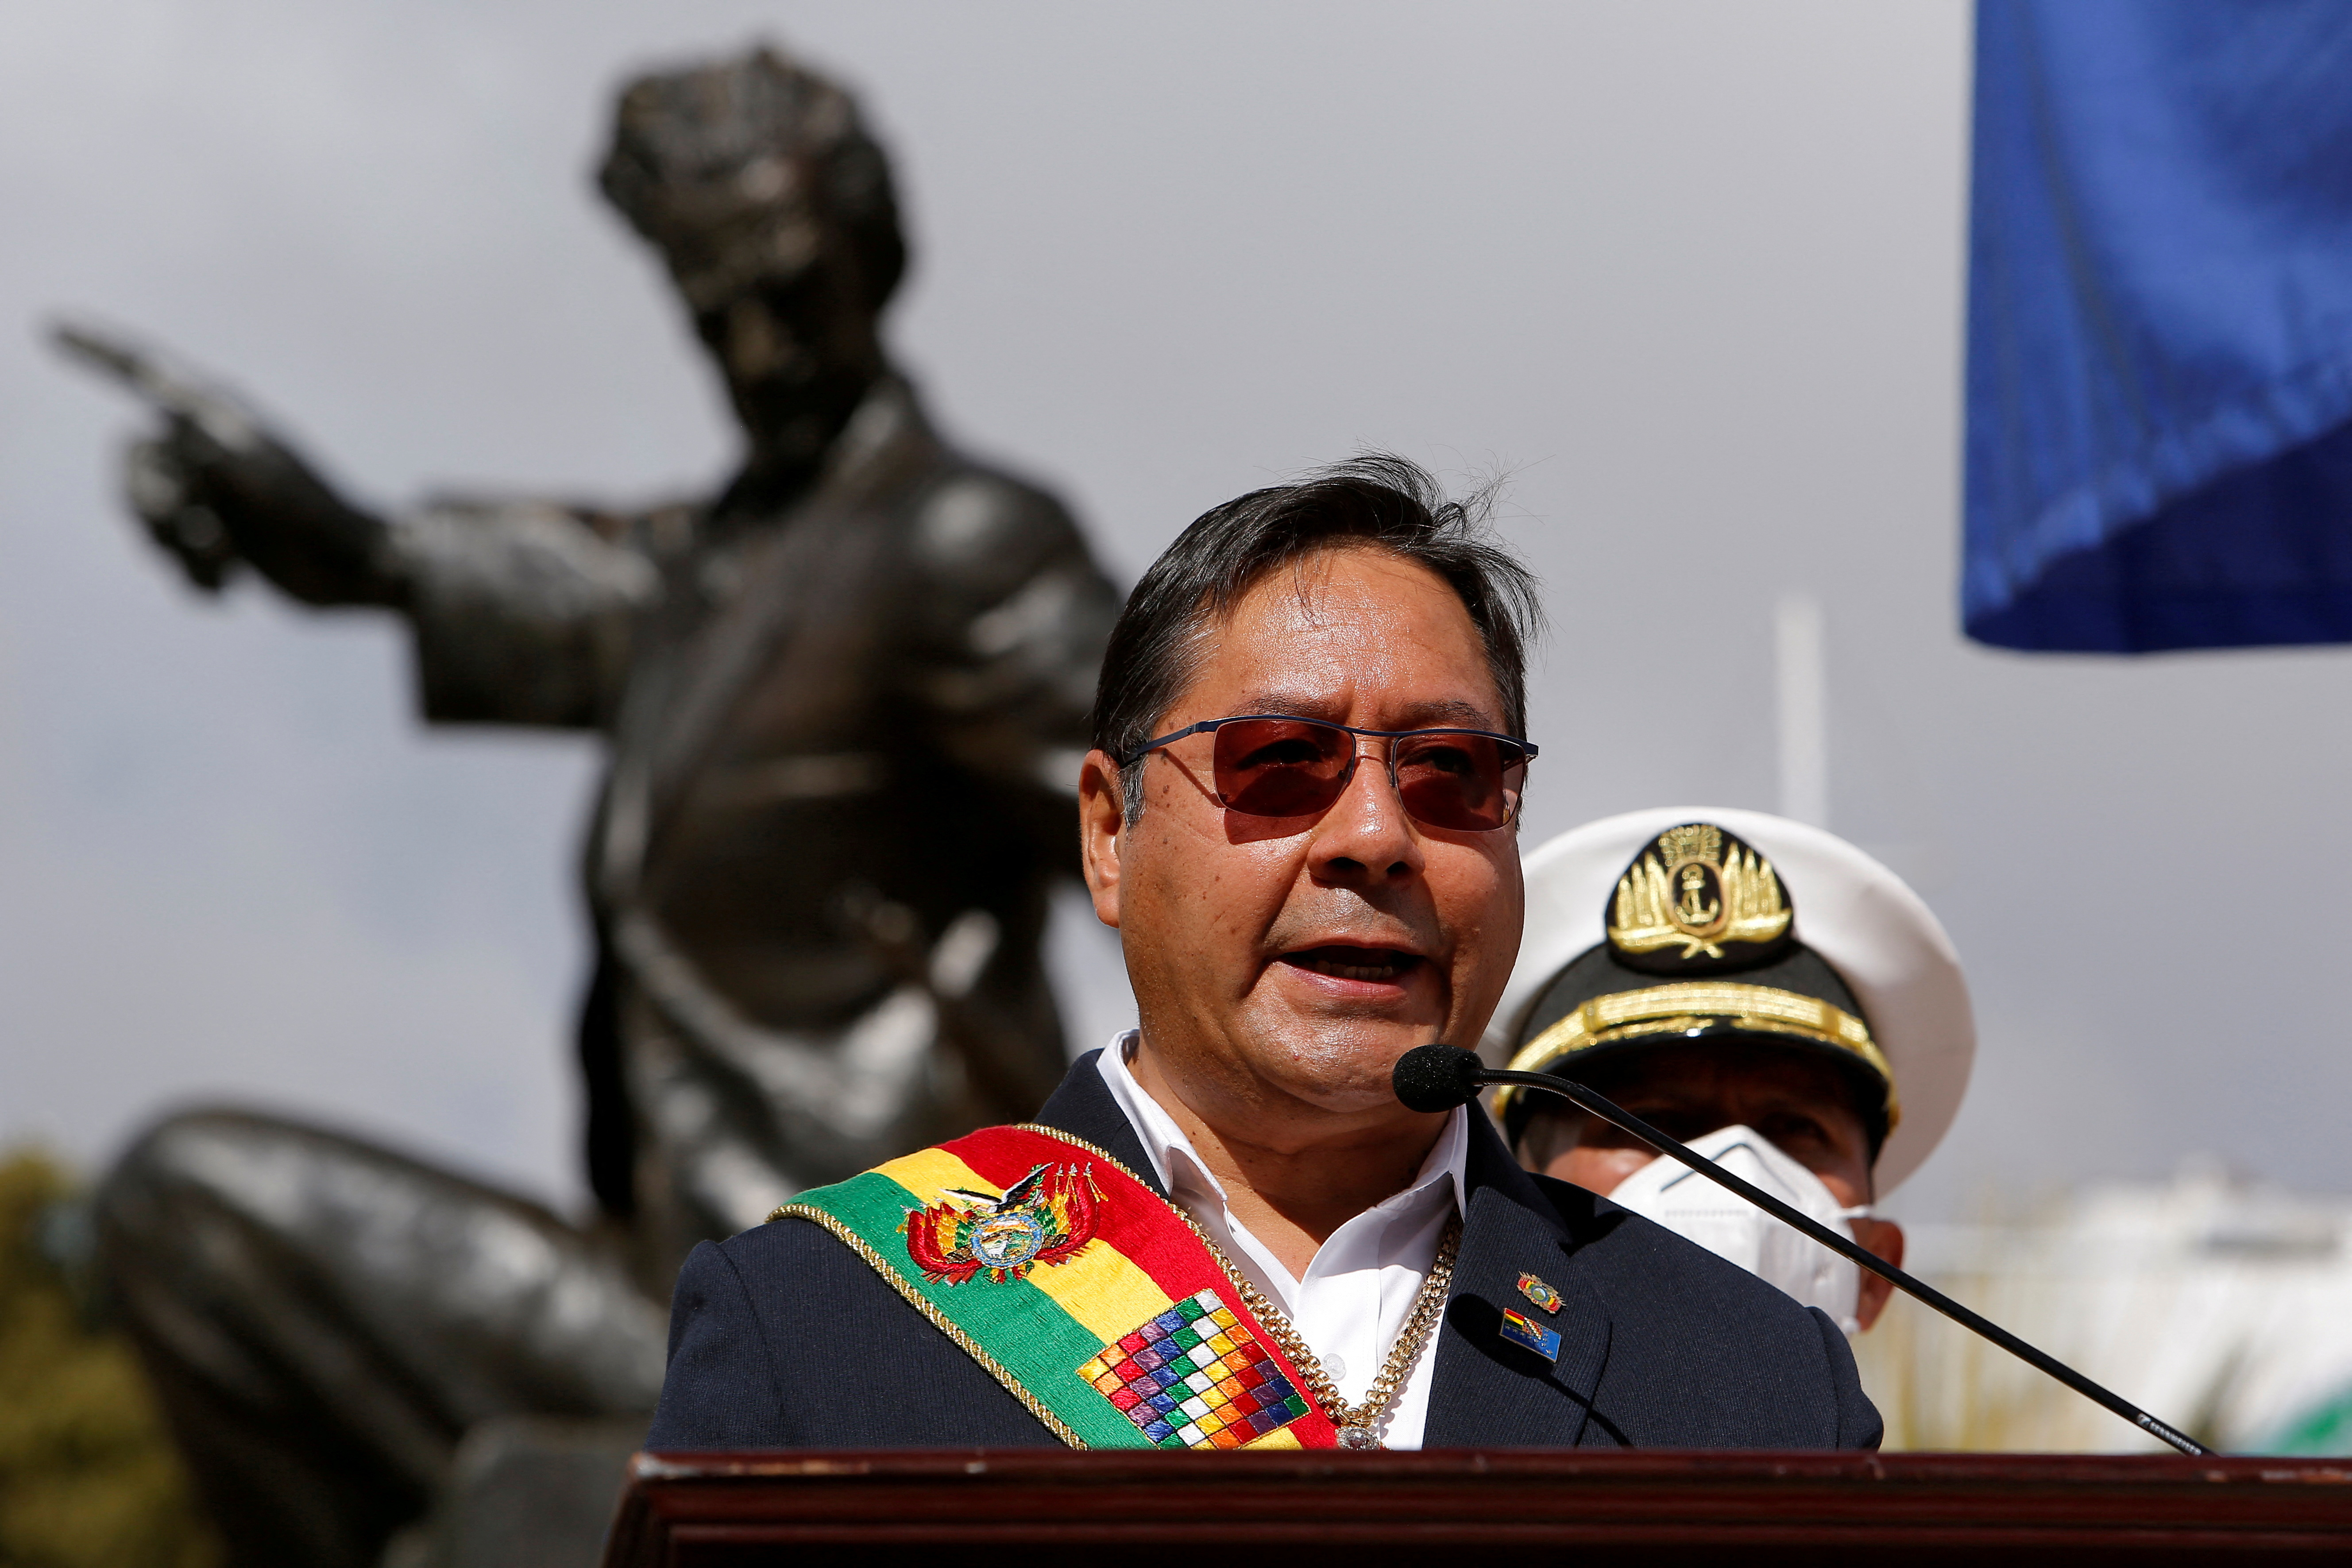 Bolivian President Arce attends a ceremony drawing attention to Bolivia's claim to sea access, in La Paz